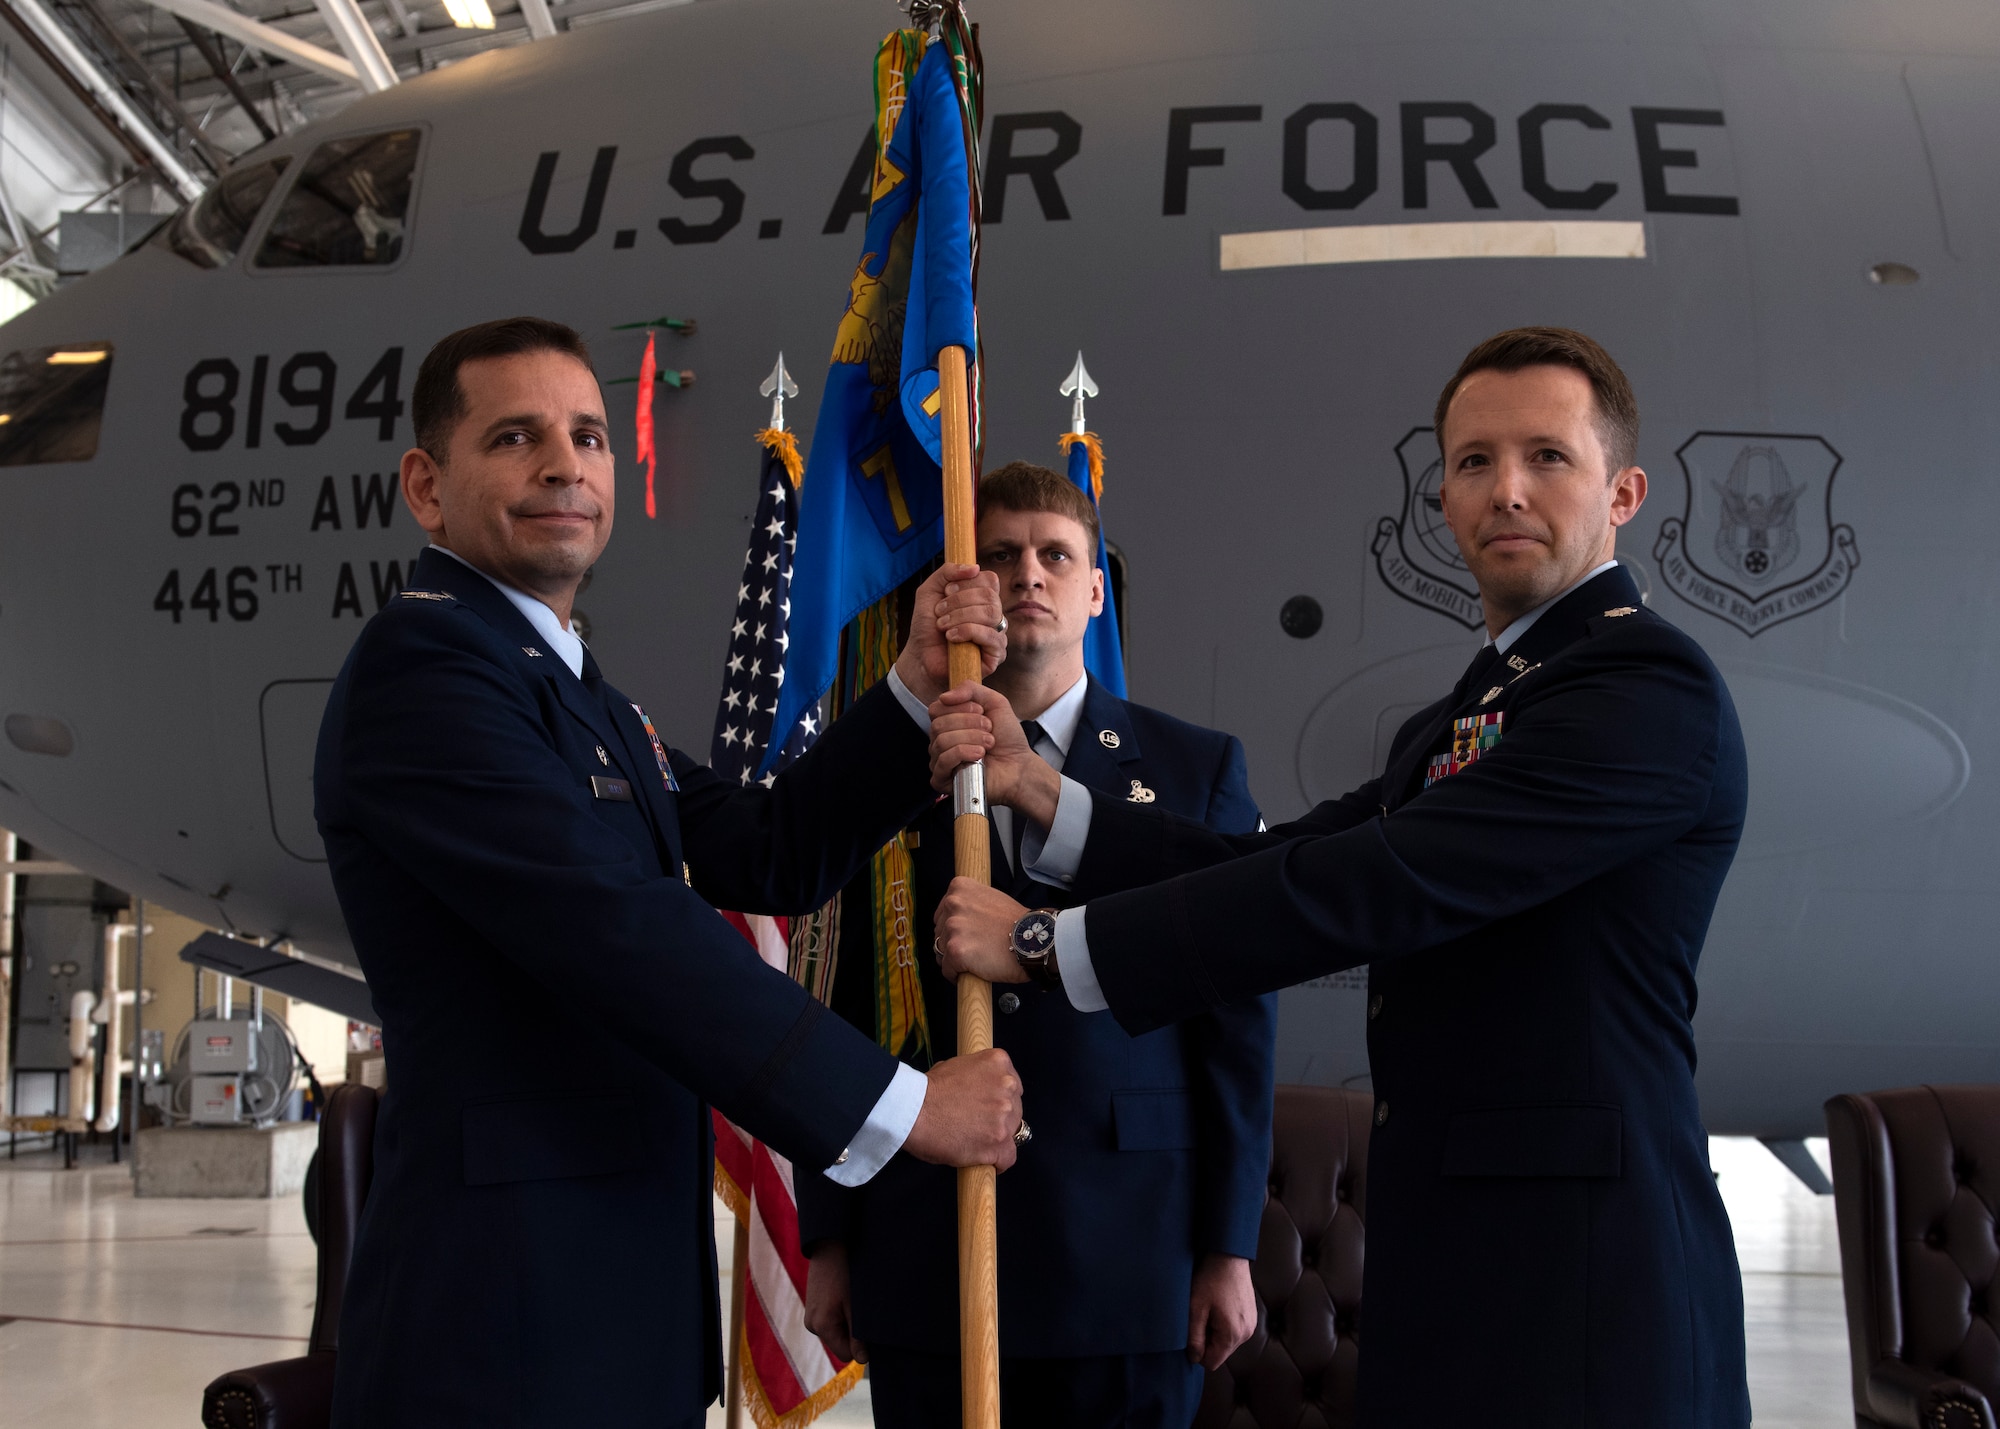 U.S. Air Force Lt. Col. Brandon Westling, right, commander of the 7th Airlift Squadron, assumes command from Col. Sergio Anaya, commander of the 62d Operations Group, during a change of command ceremony at Joint Base Lewis-McChord, Washington, June 16, 2022. Aircrews with the 7th AS operate the C-17 Globemaster III aircraft and have an impressive list of firsts; as they operated the first C-17 to land on Antarctic ice and the first C-17 to land in North Korea. (U.S. Air Force photo by Staff Sgt. Zoe Thacker)